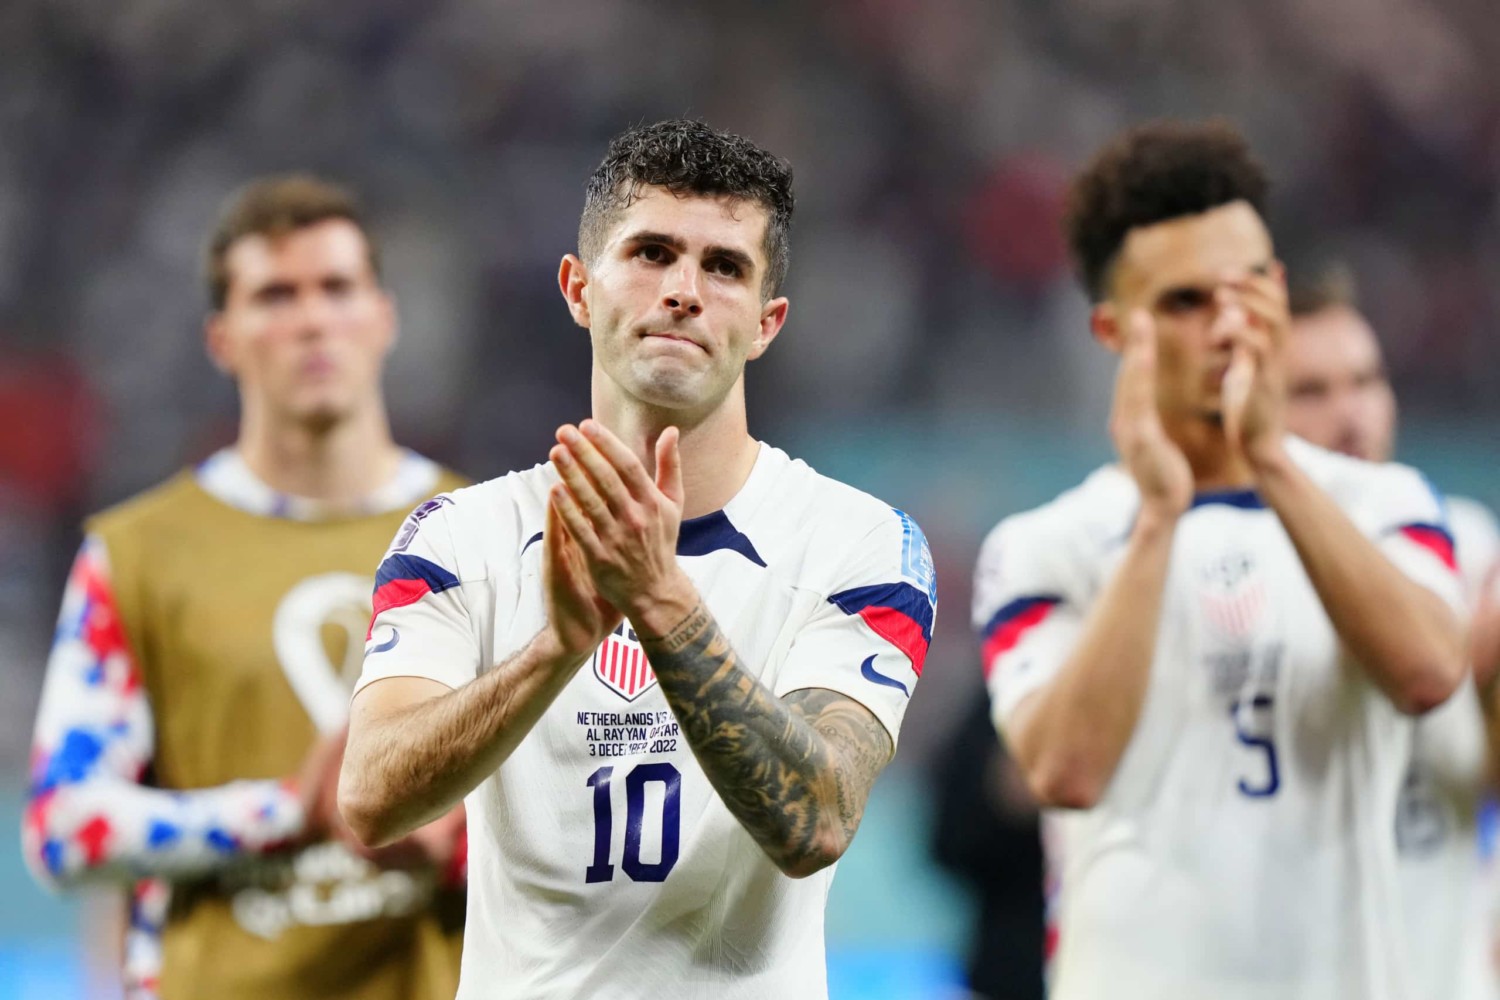 USMNT players, including Christian Pulisic, thank fans after losing World Cup match to 